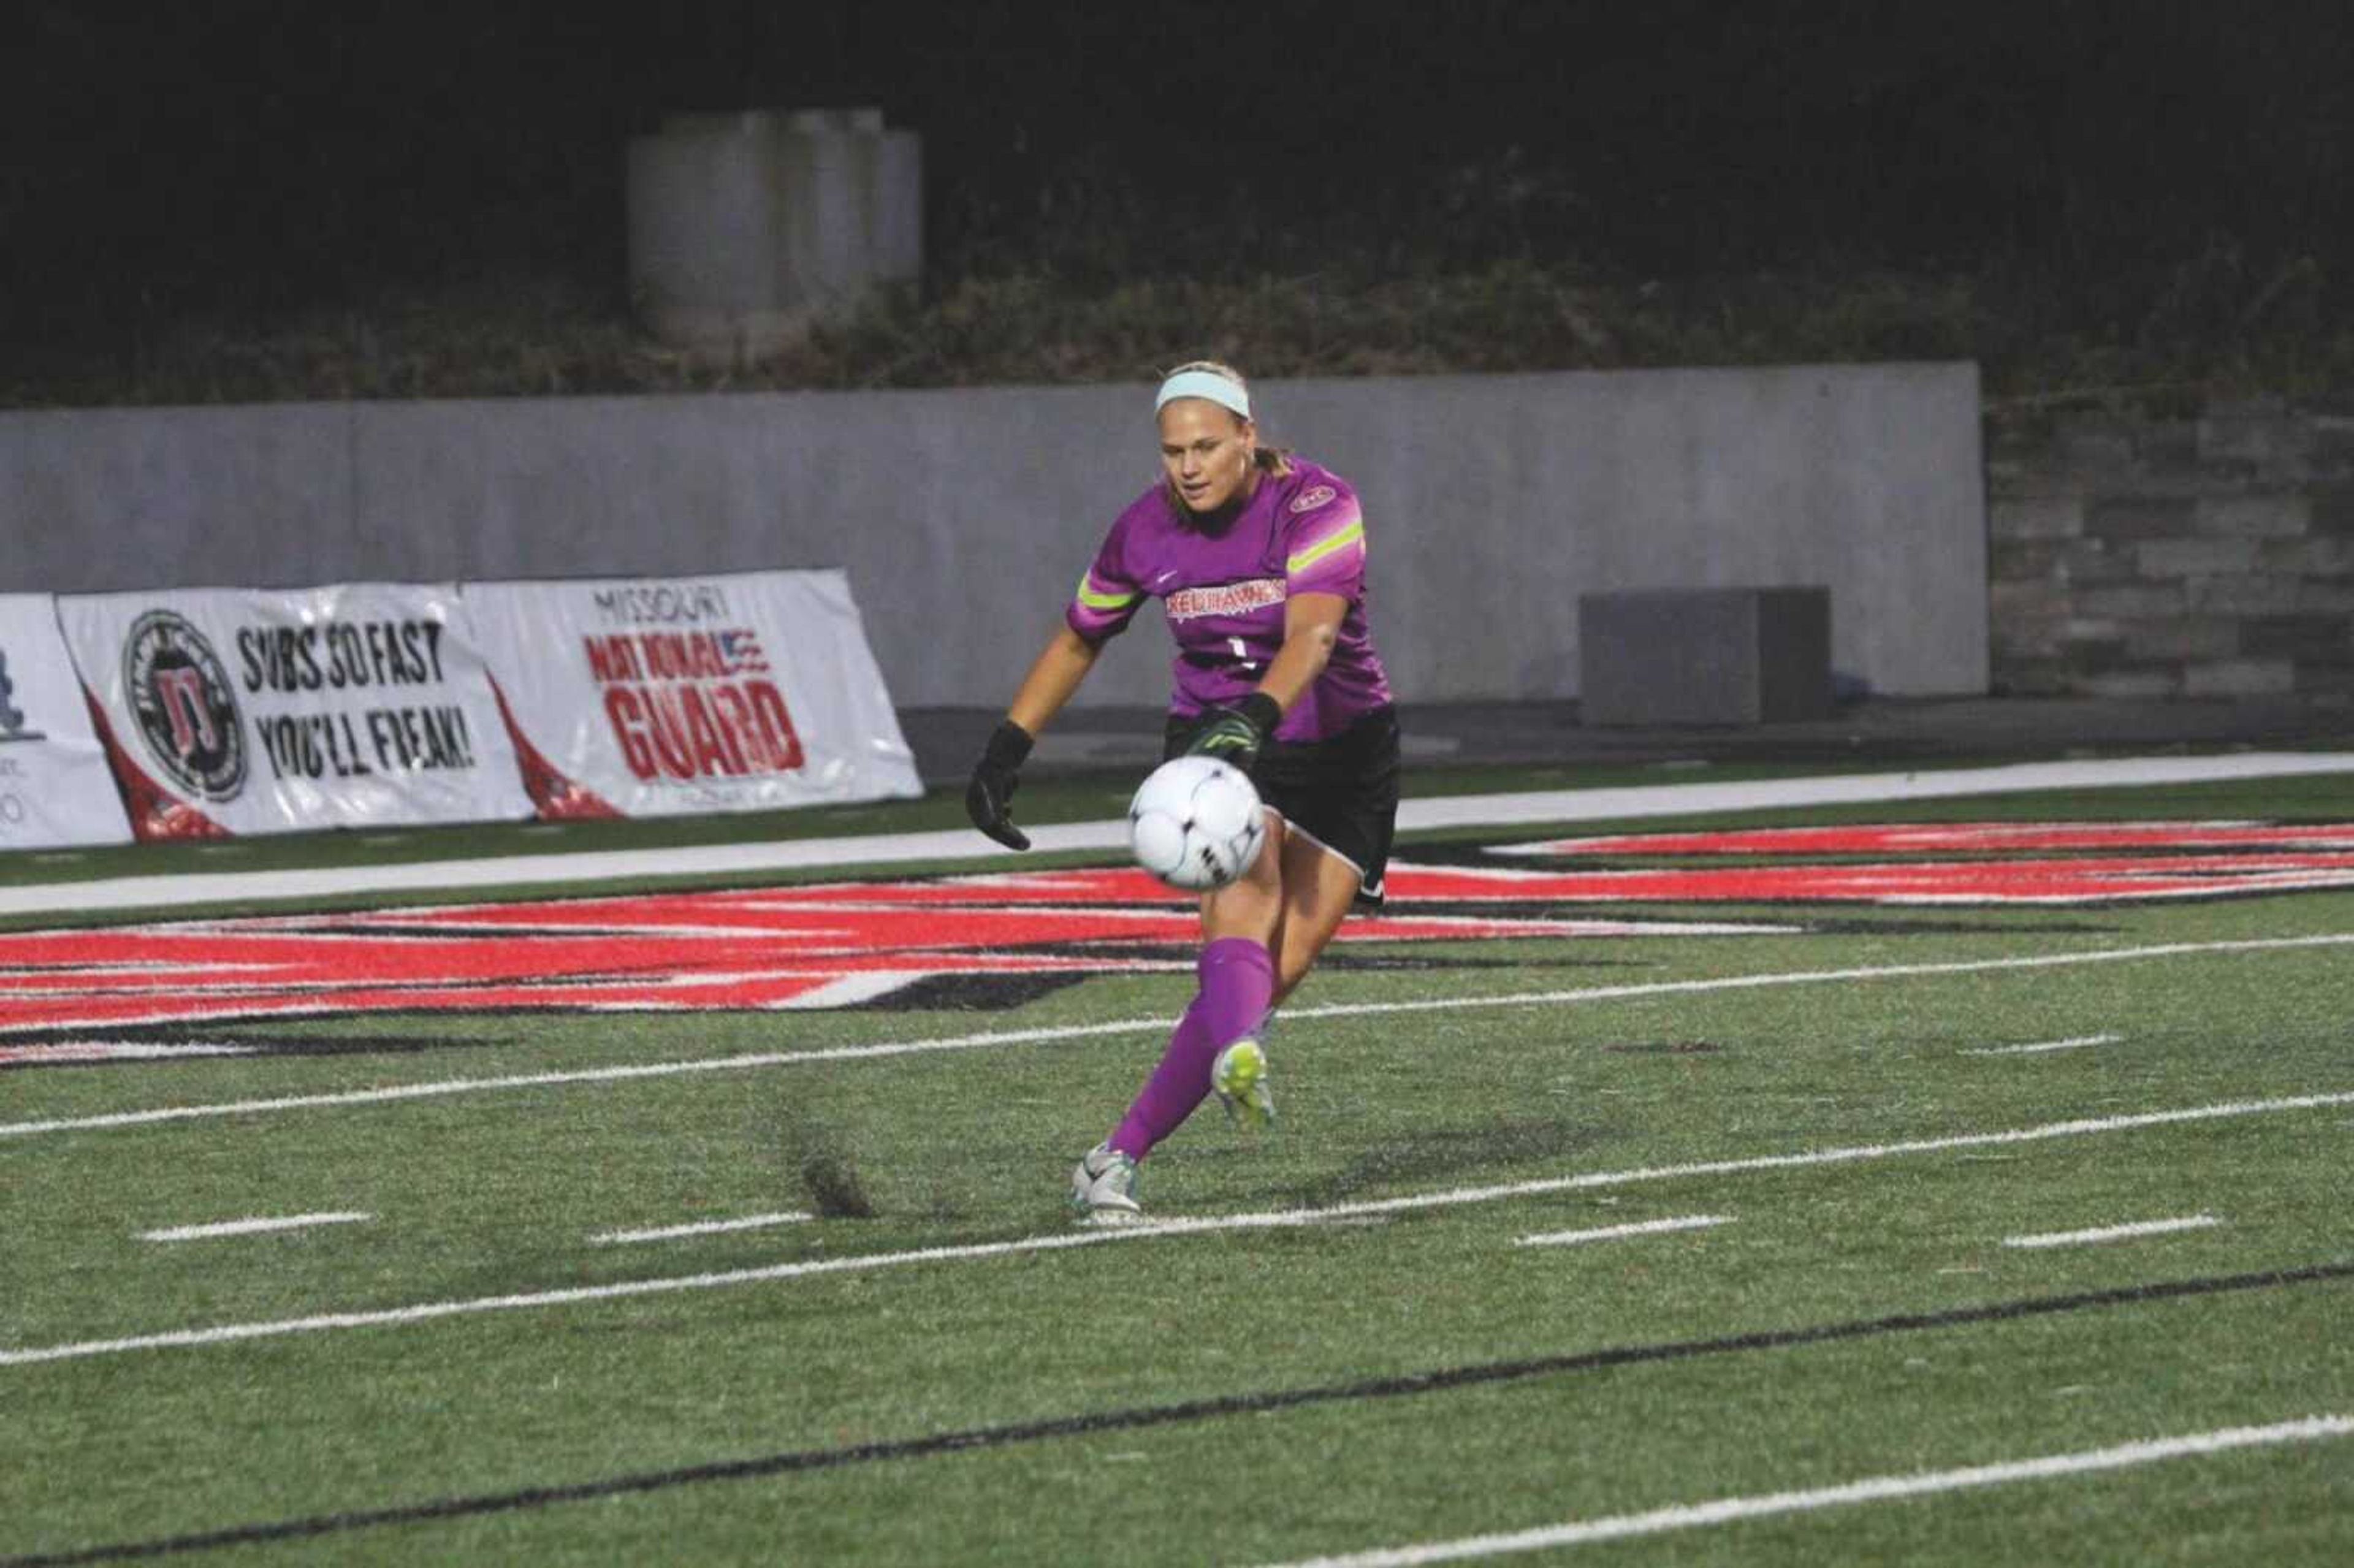 Sophomore goalkeeper Kindra Lierz returns after a freshman season where she was named both Ohio Valley Conference Freshman of the Year and OVC Defensive Player of the Year.